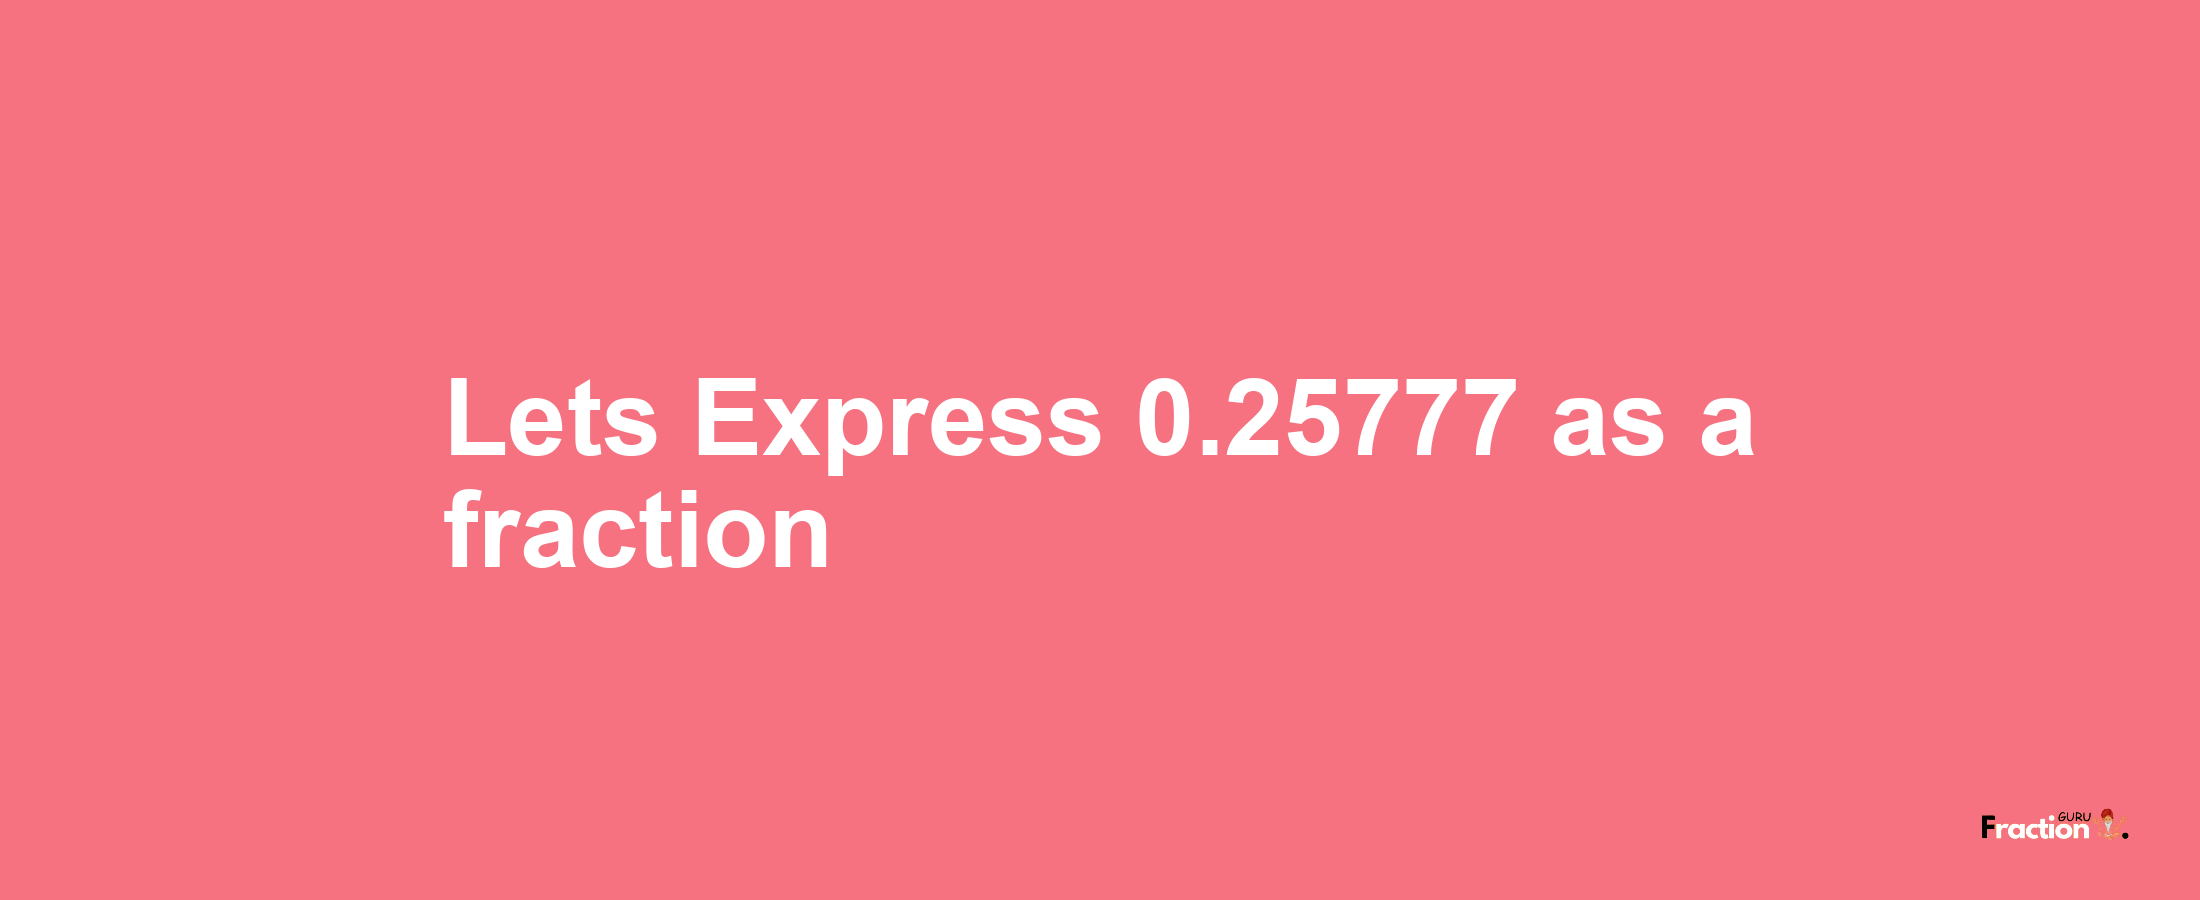 Lets Express 0.25777 as afraction